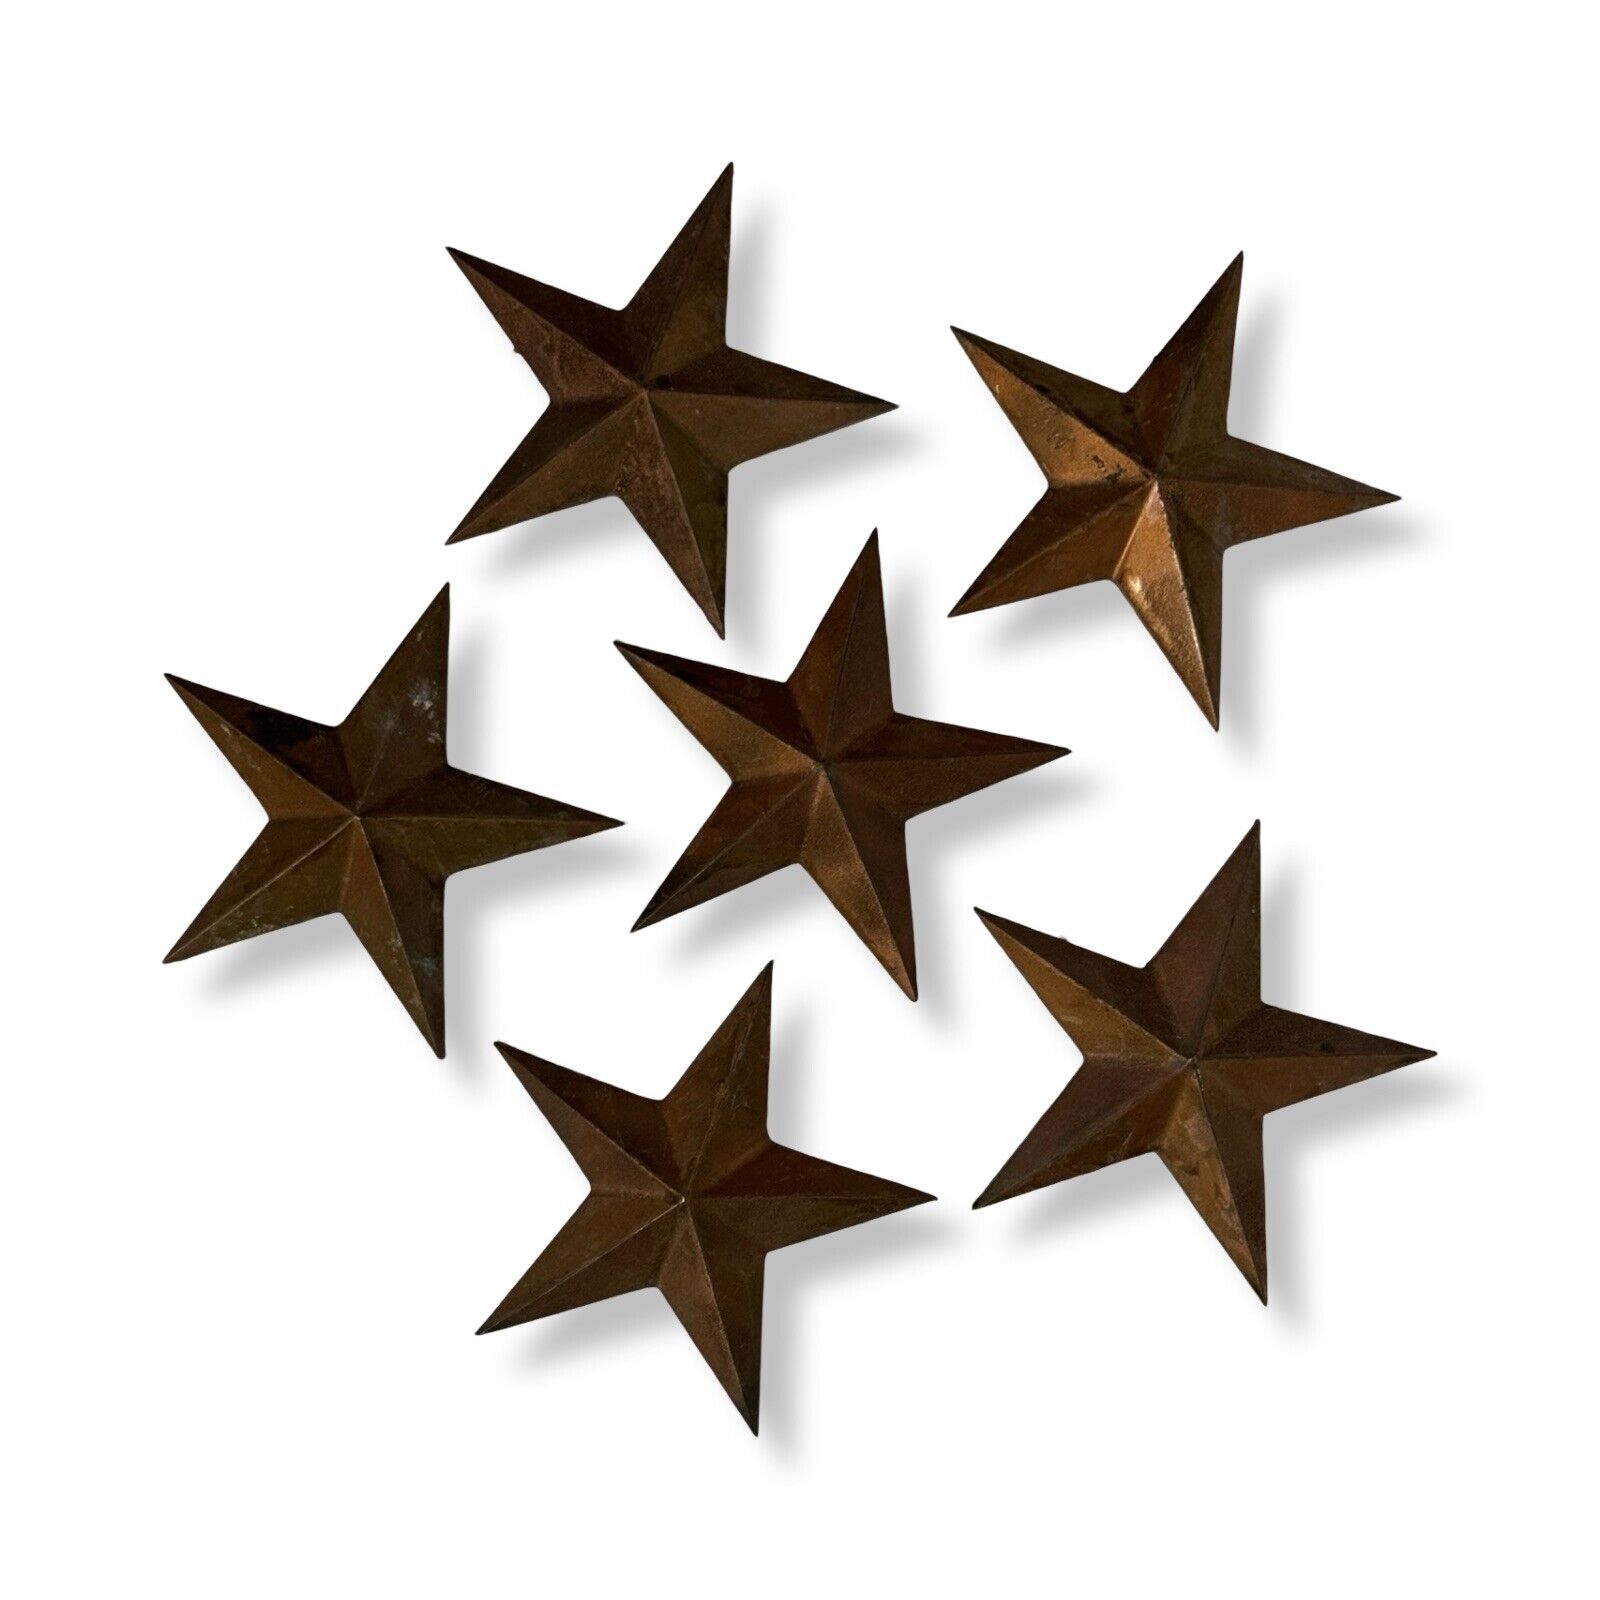 Antique Solid Brass 5-Point Stars Set of 6 - Late 19th - Early 20th C.